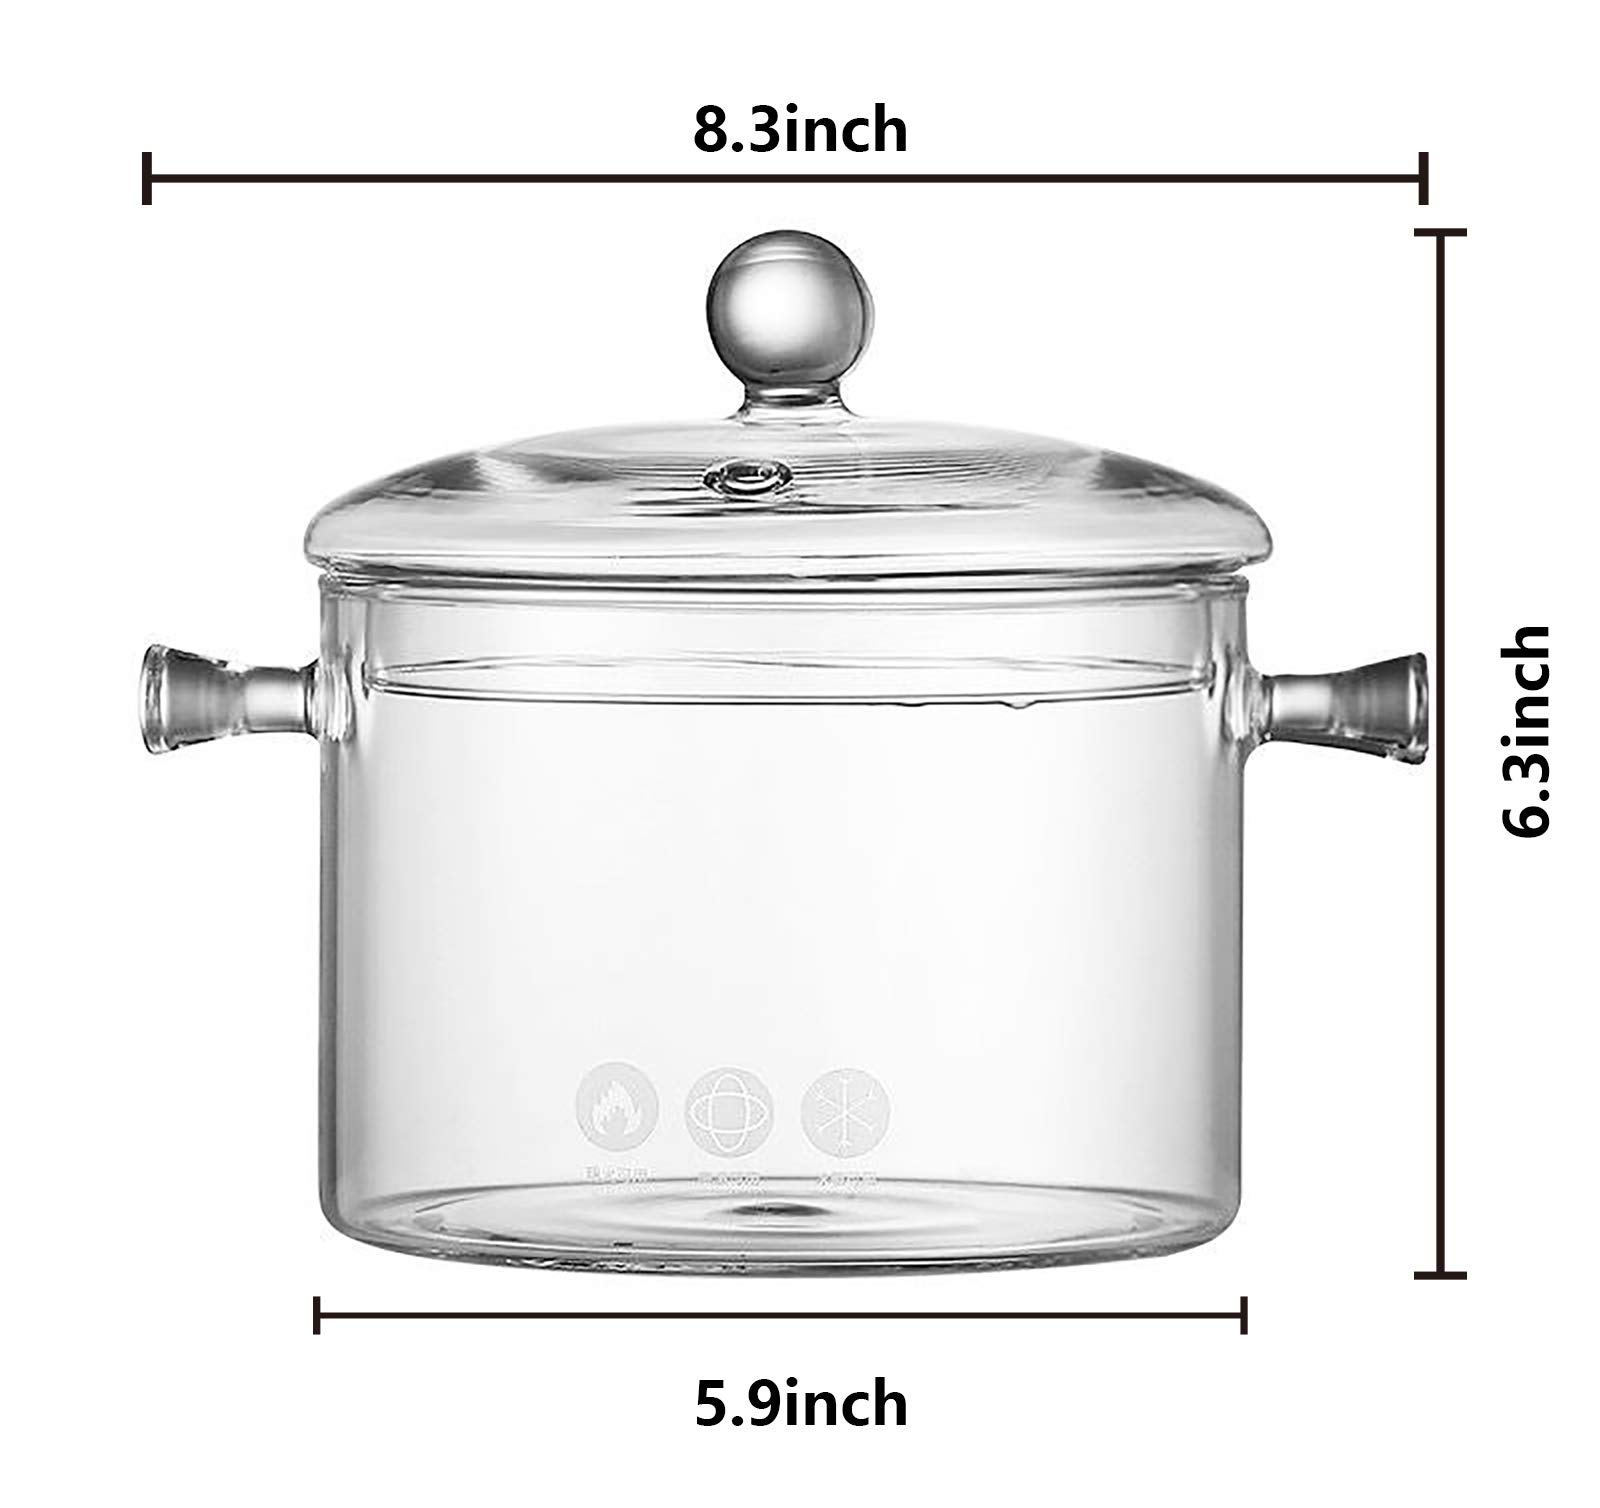 Jucoan 1.5L/50oz Glass Saucepan with Cover, Heat Resistant Stovetop Glass Cooking Pot with Lids for Pasta Noodle, Soup, Milk, Baby Food, Glass Cookware Gift for Housewarming, Wedding, Birthday